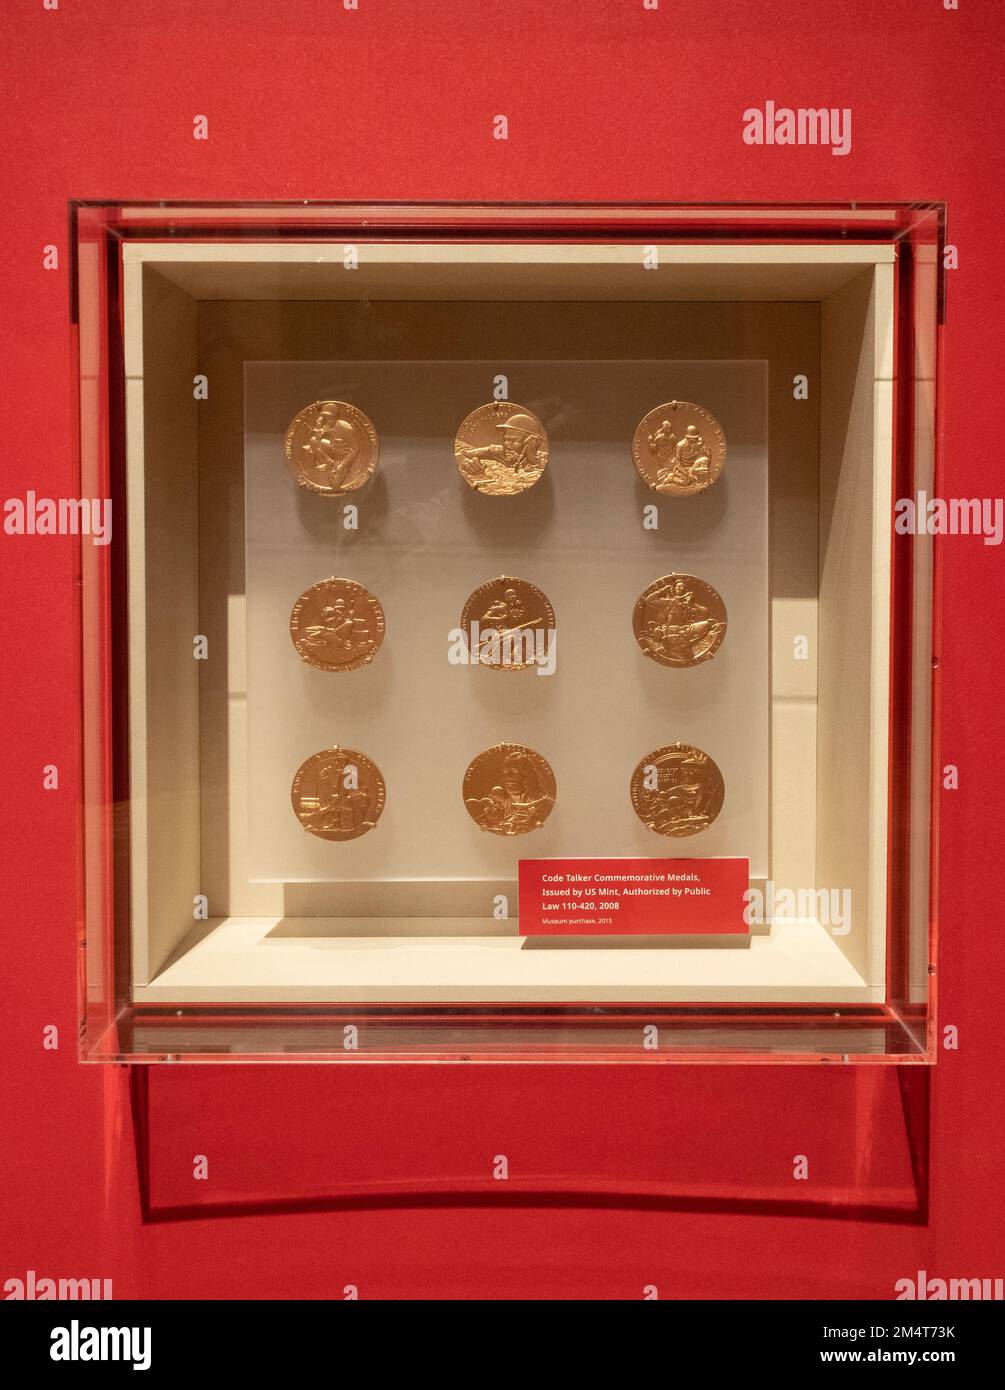 Nine gold Code Talker Commemorative Medals on display at the First Americans Museum in Oklahoma City, Oklahoma. Stock Photo